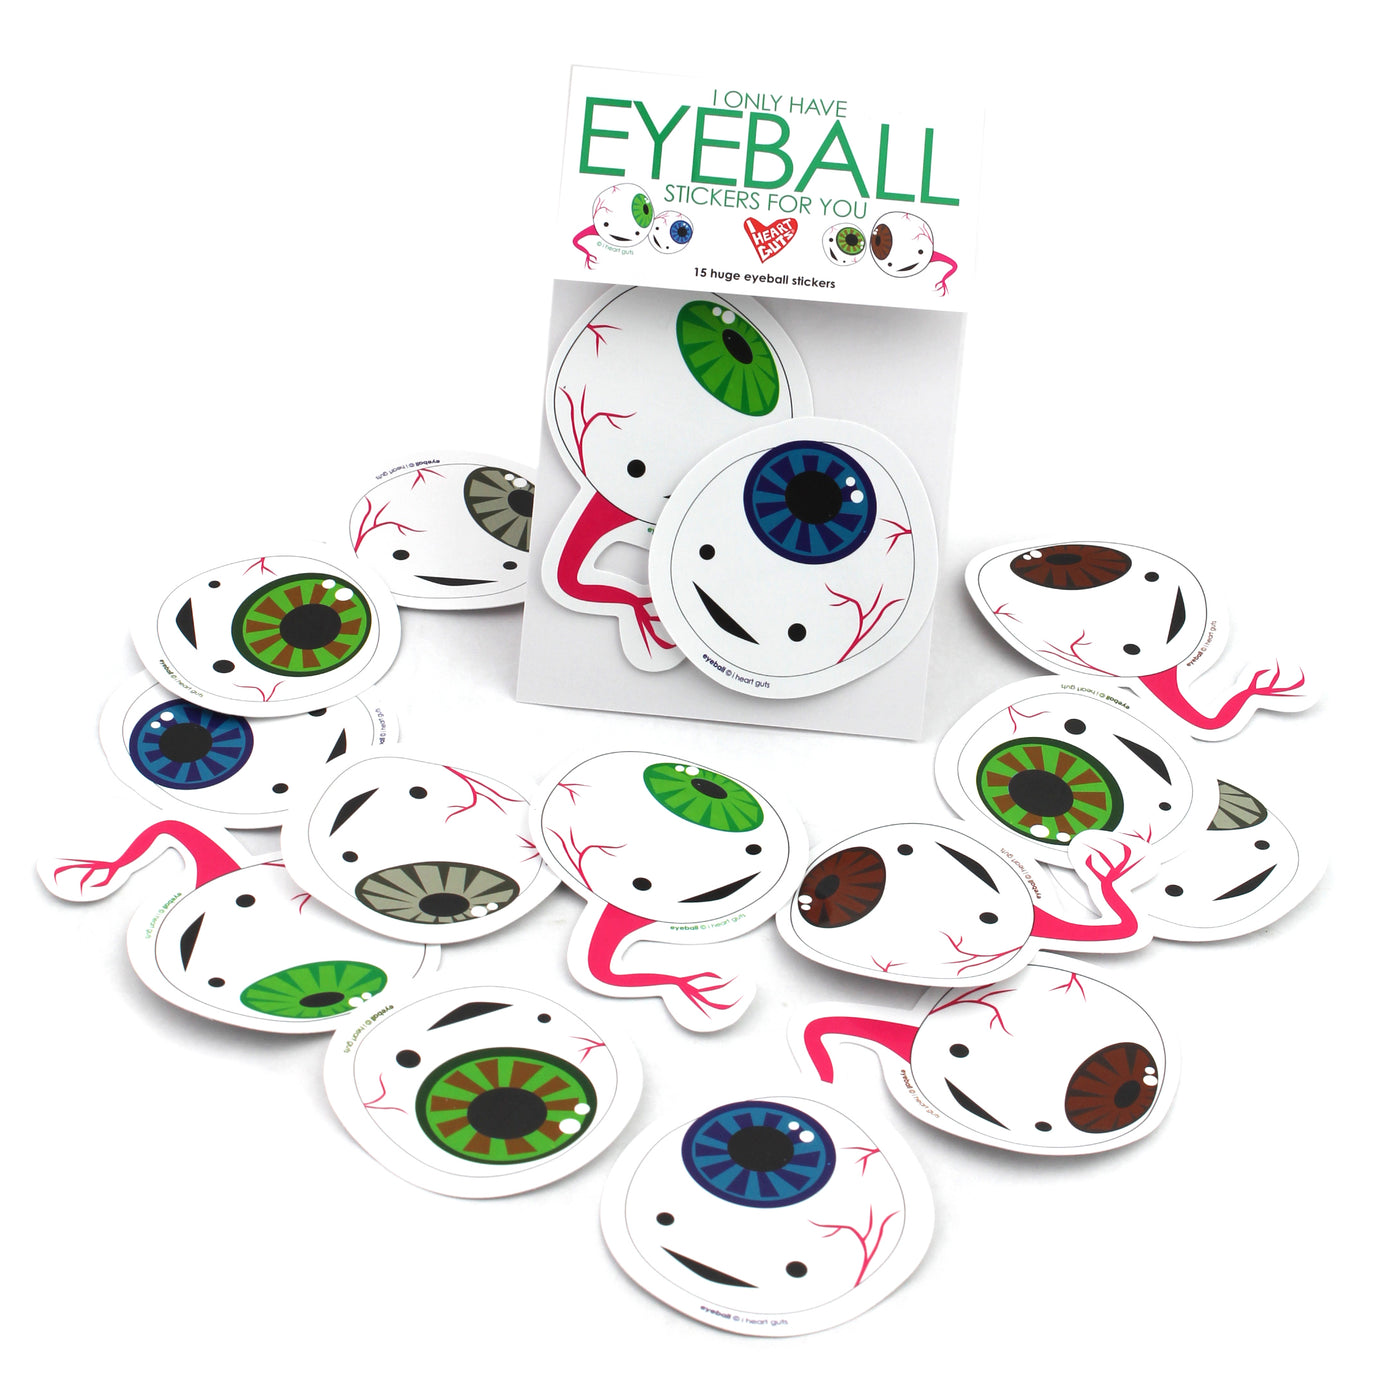 I Heart Guts I Only Have Eyeball Stickers for You - 15 Eyeball Stickers - Vinyl Sticker Pack